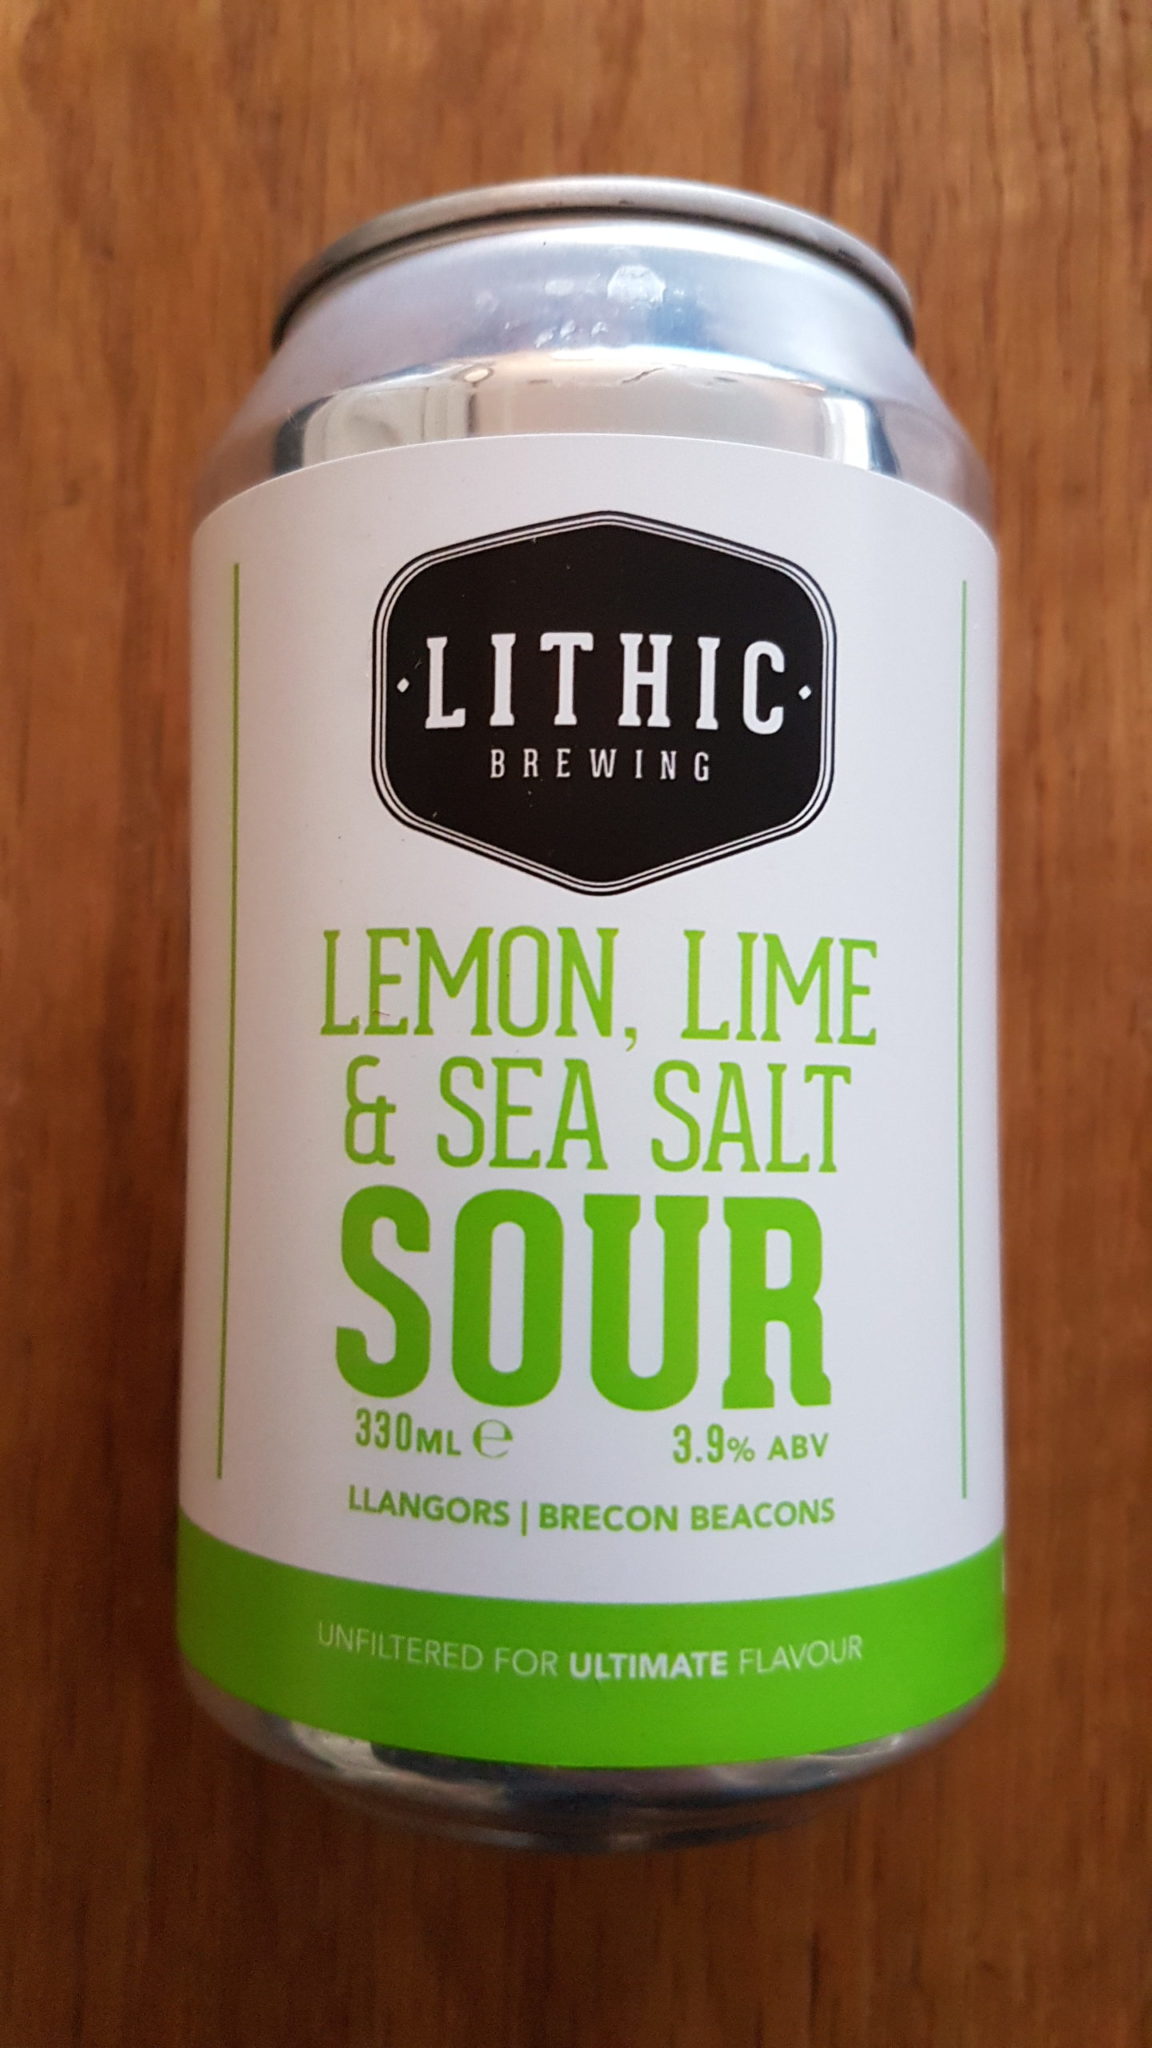 A lemon, lime and sea salt sour beer from Lithic Brewing in Llangorse